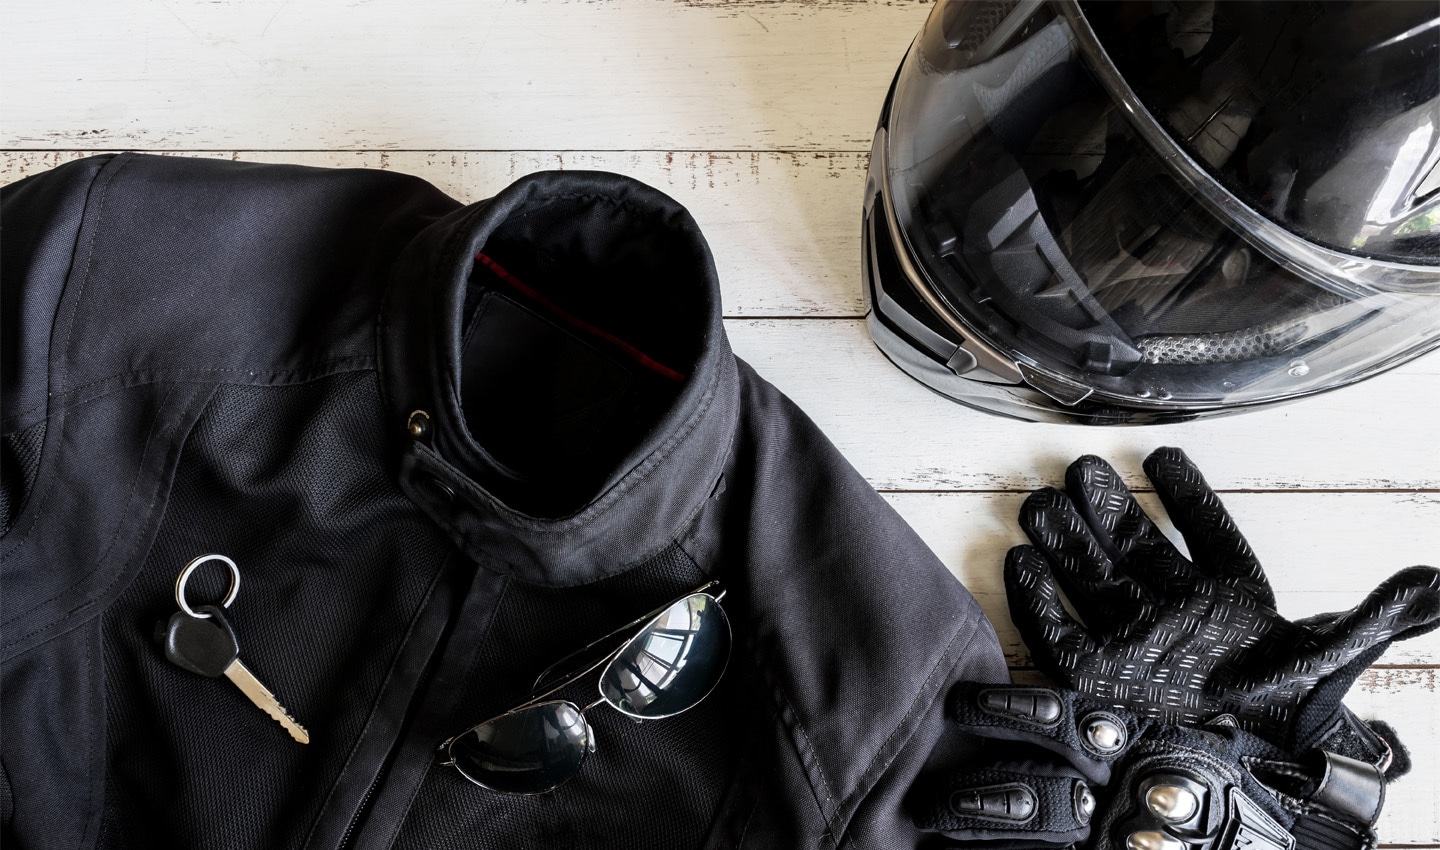 Be safe on the road and wear protective gear, such as a helmet, gloves, long trousers and a jacket.